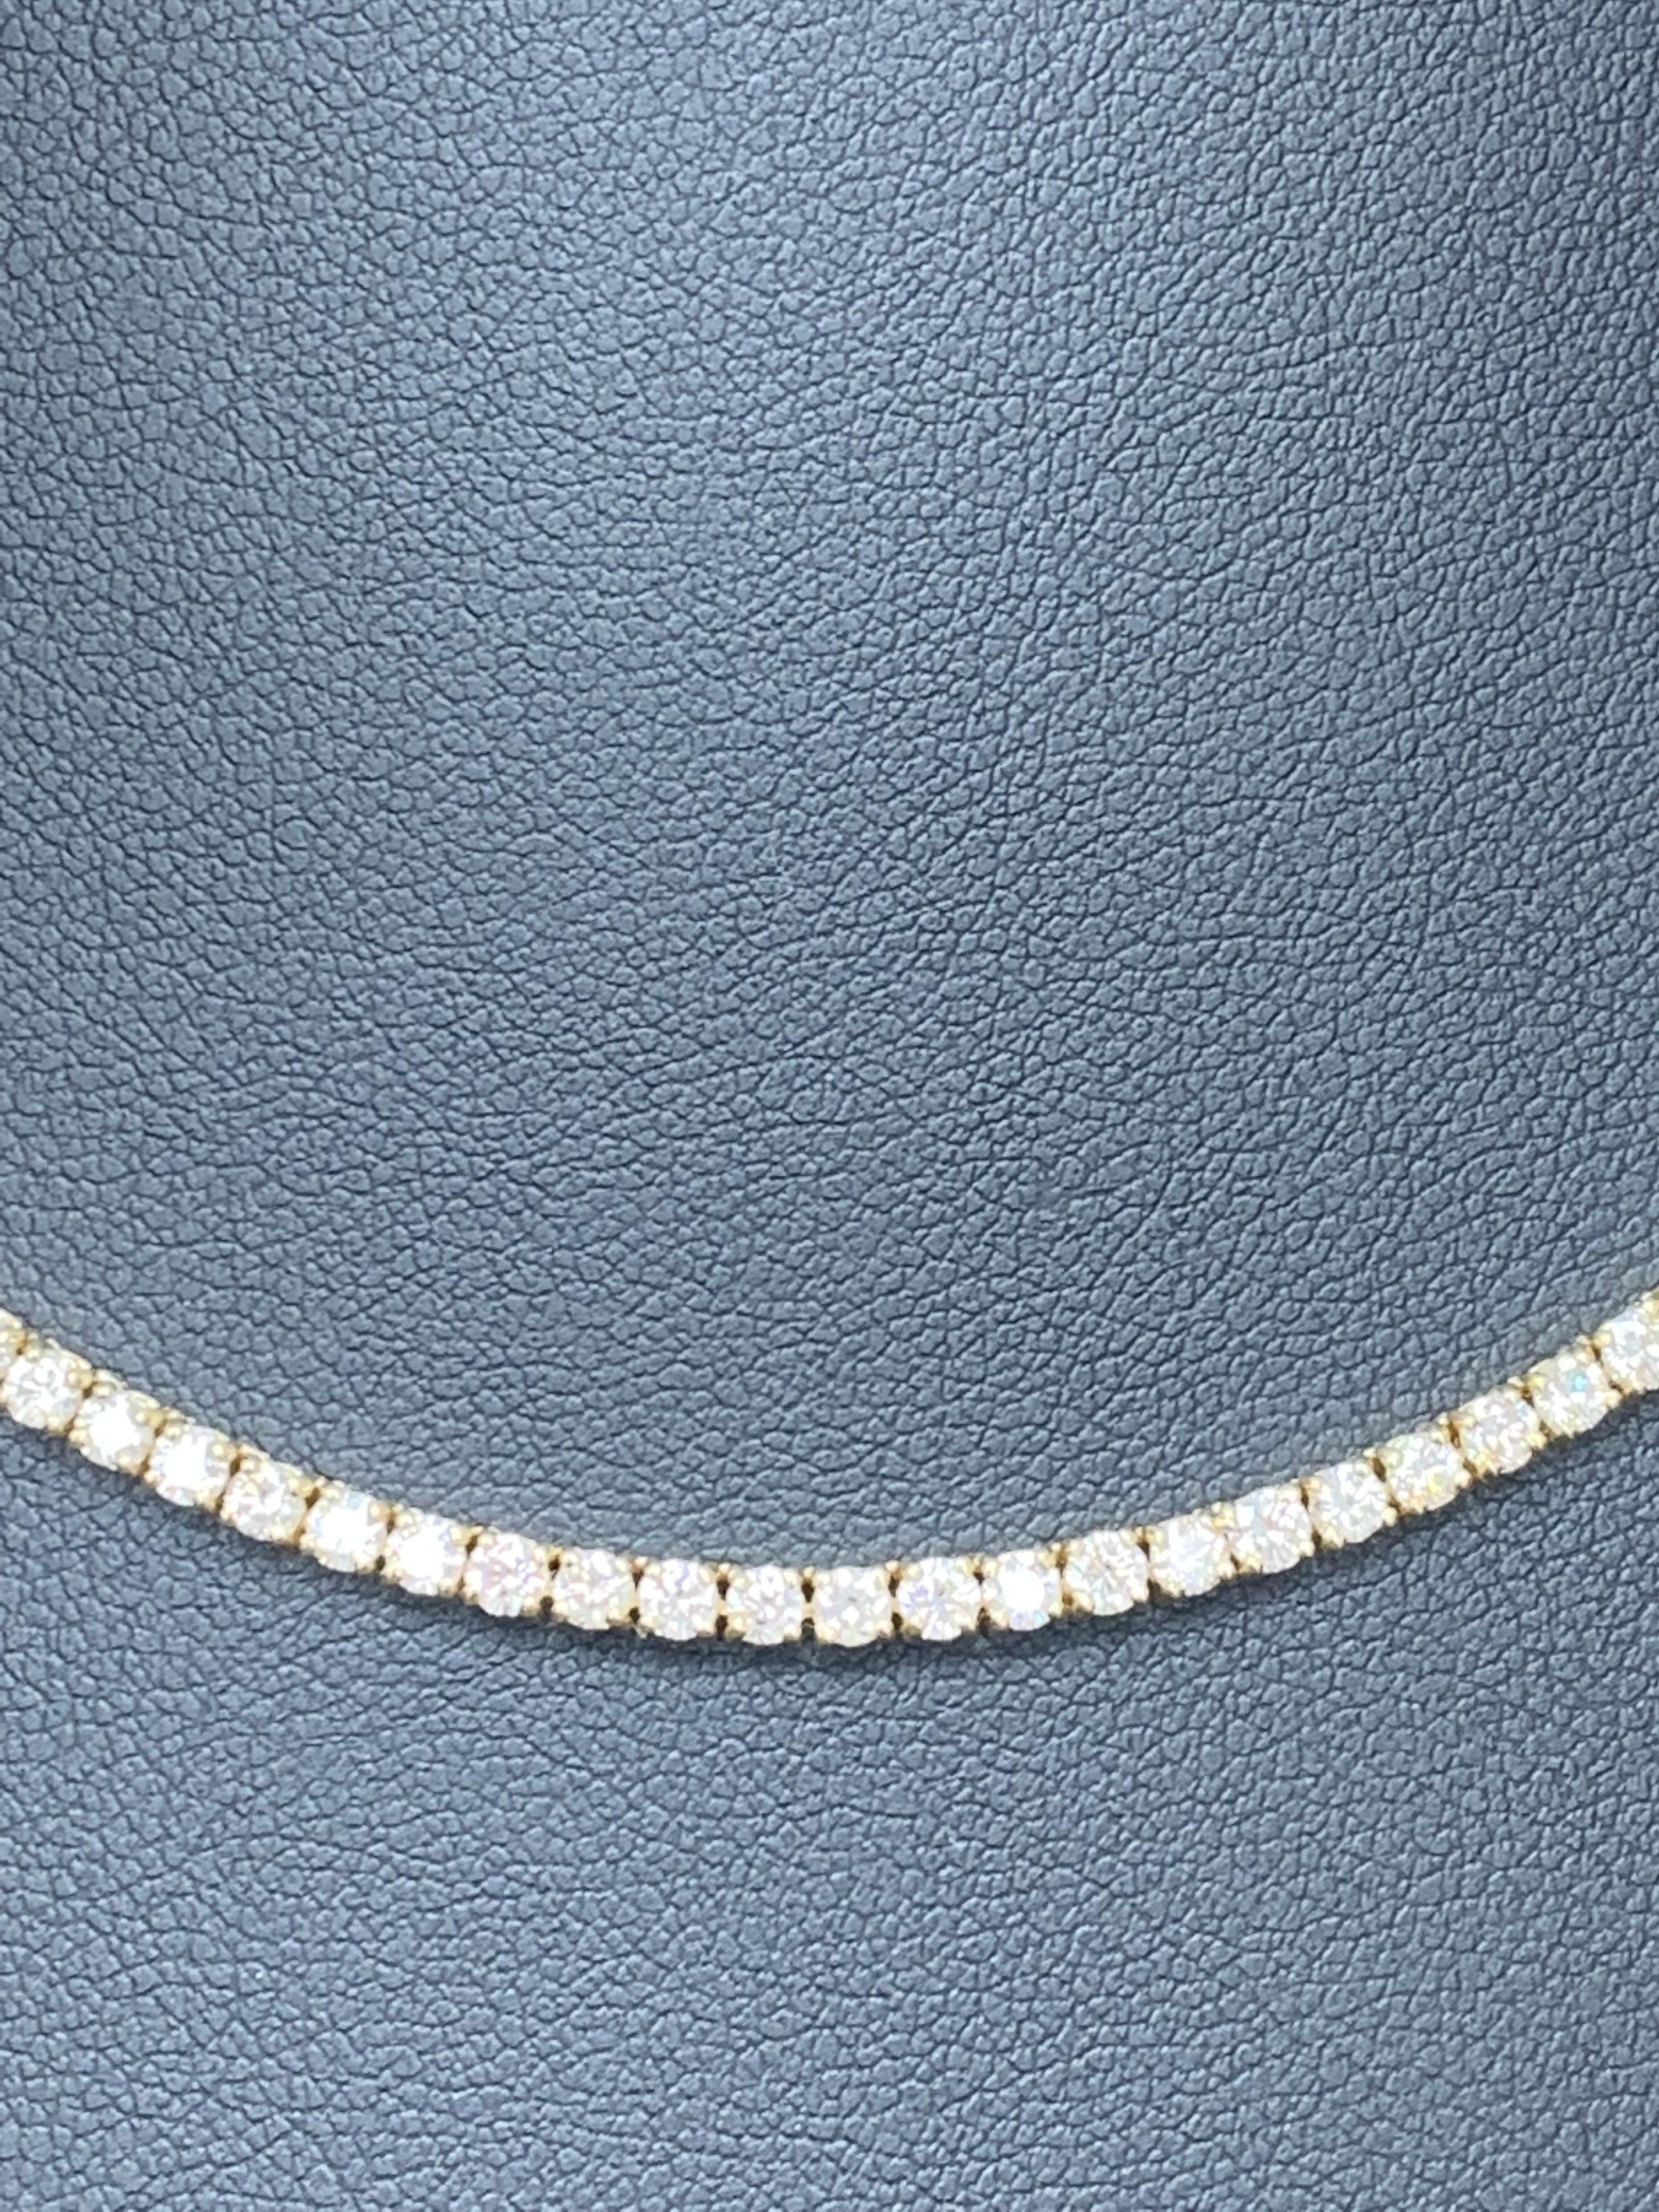 Modern 4.03 Carat Brilliant Round Cut Diamond Tennis Necklace in 14K Yellow Gold For Sale